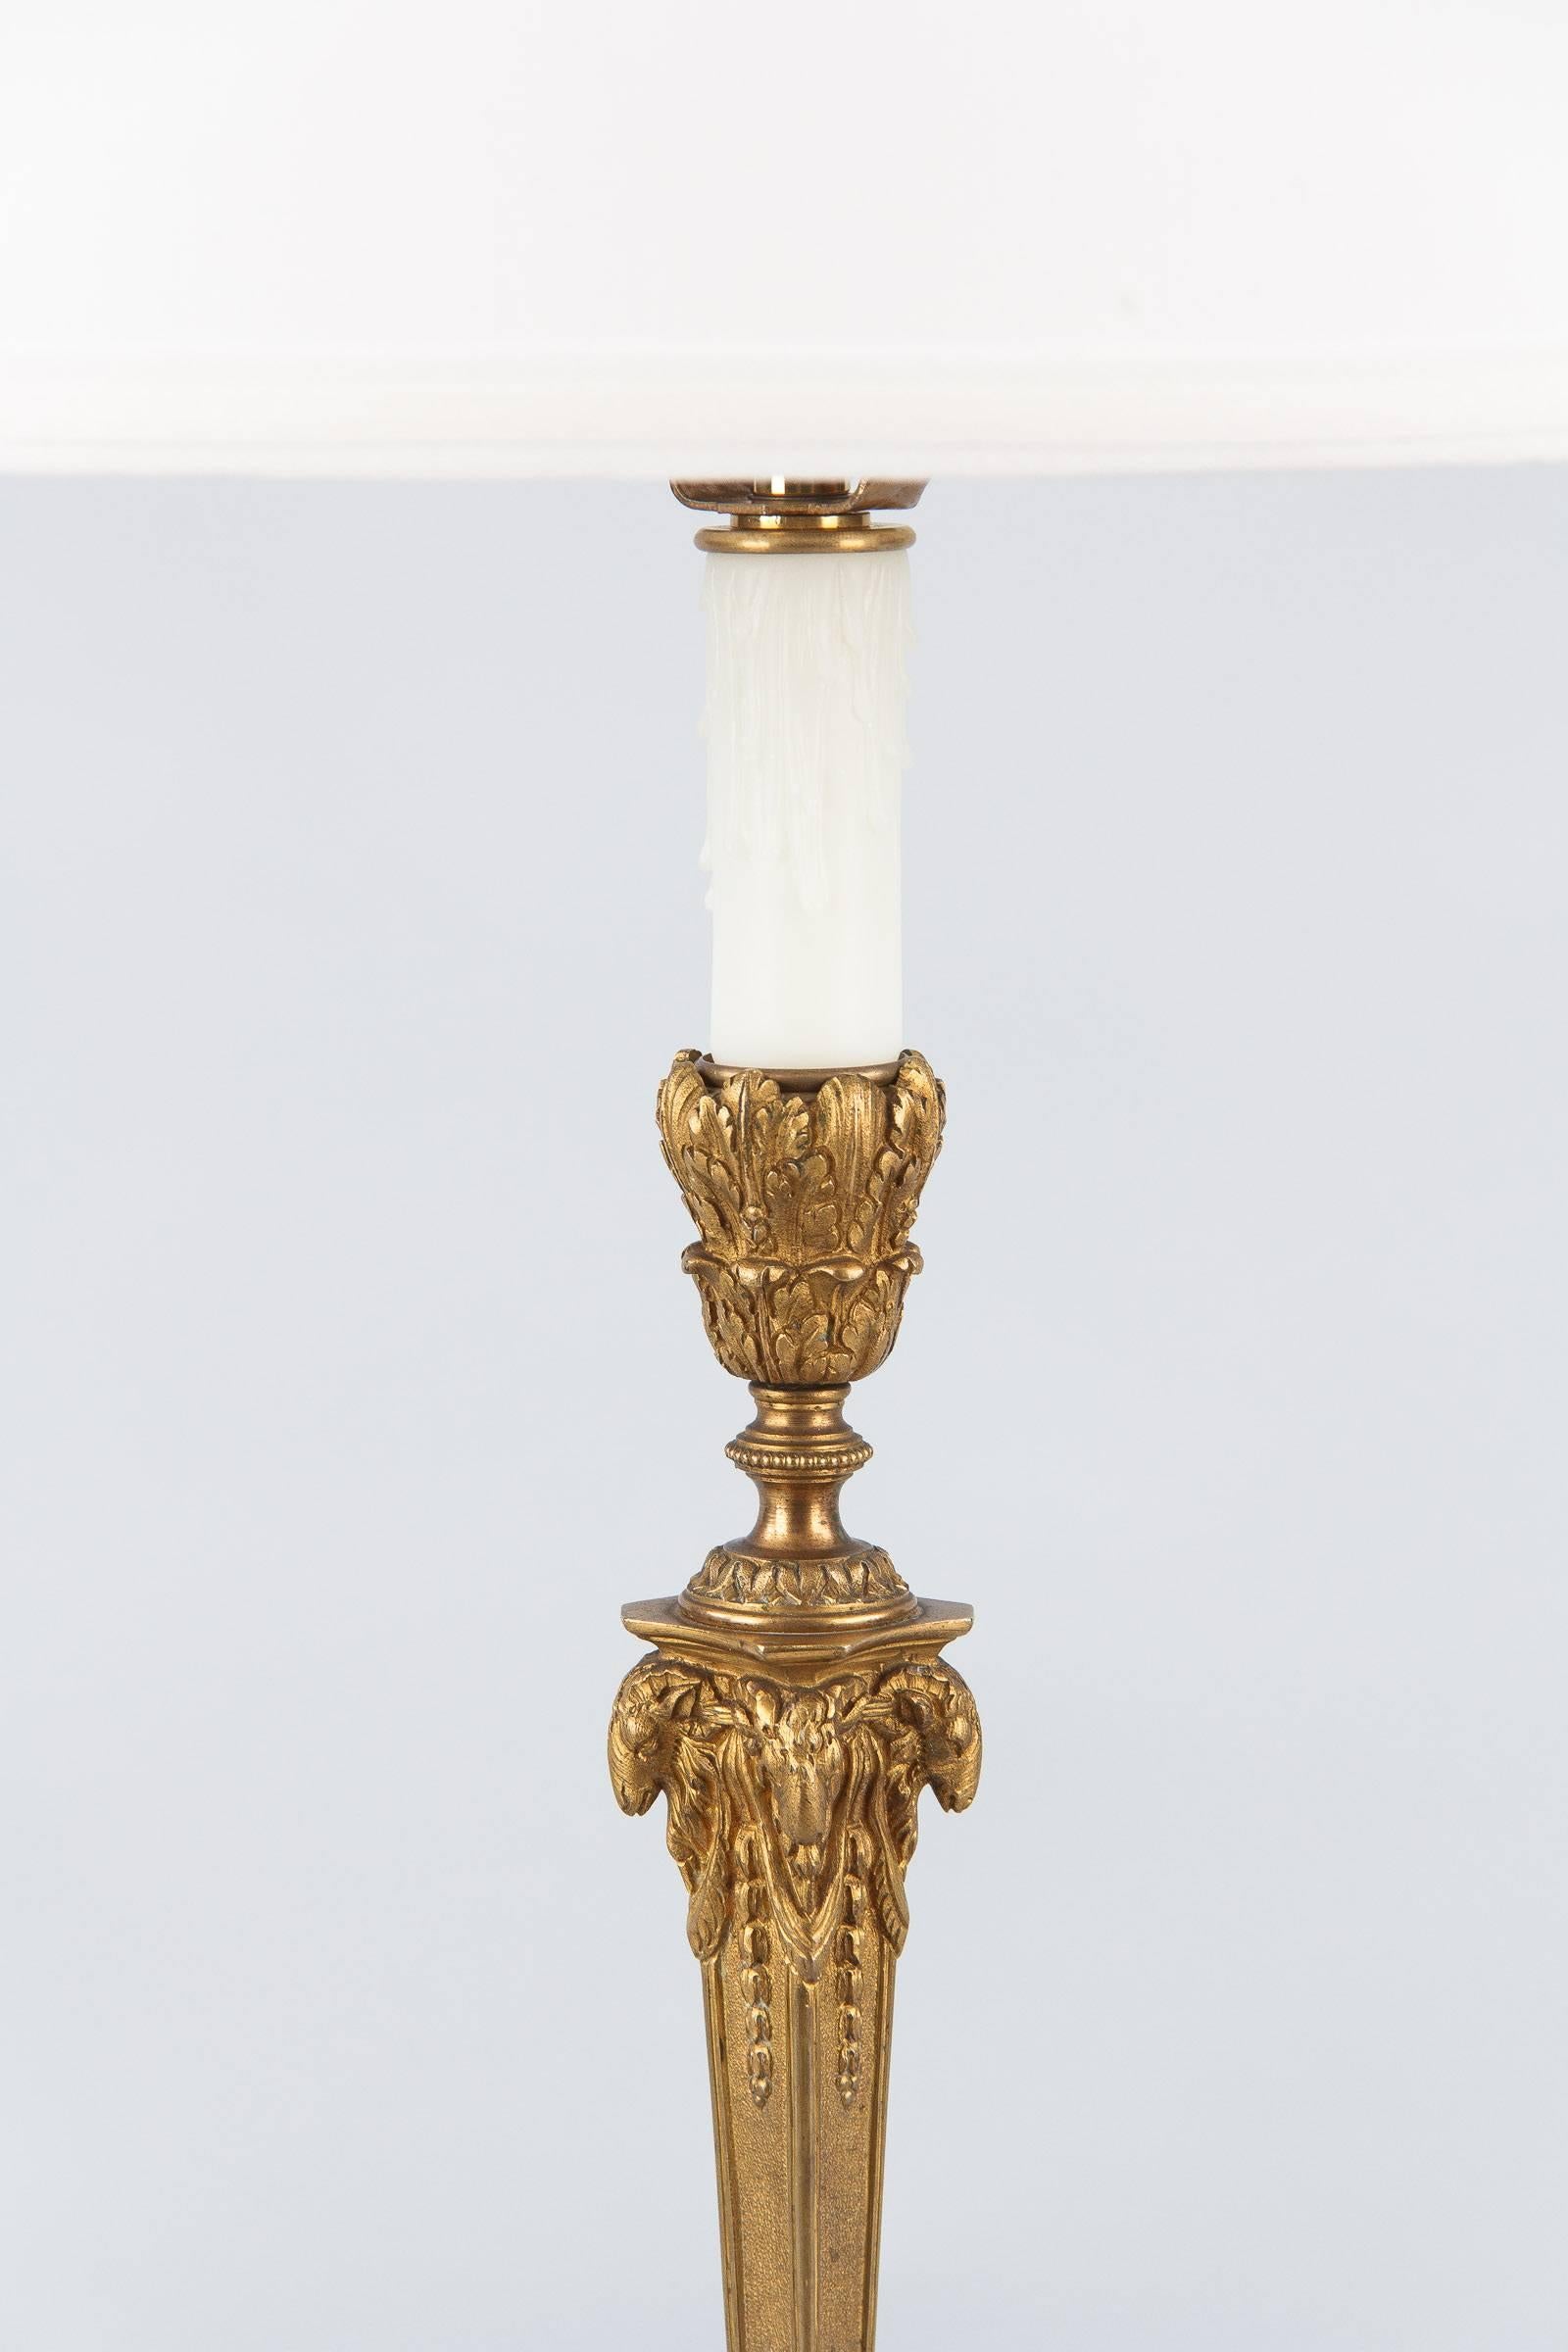 A Napoleon III period candlestick that was electrified, circa 1870s. The table lamp is made of gilded bronze with delicate chiseling and rams head design. The lamp has been rewired for a three-way bulb. The new drum shade is 10" height x